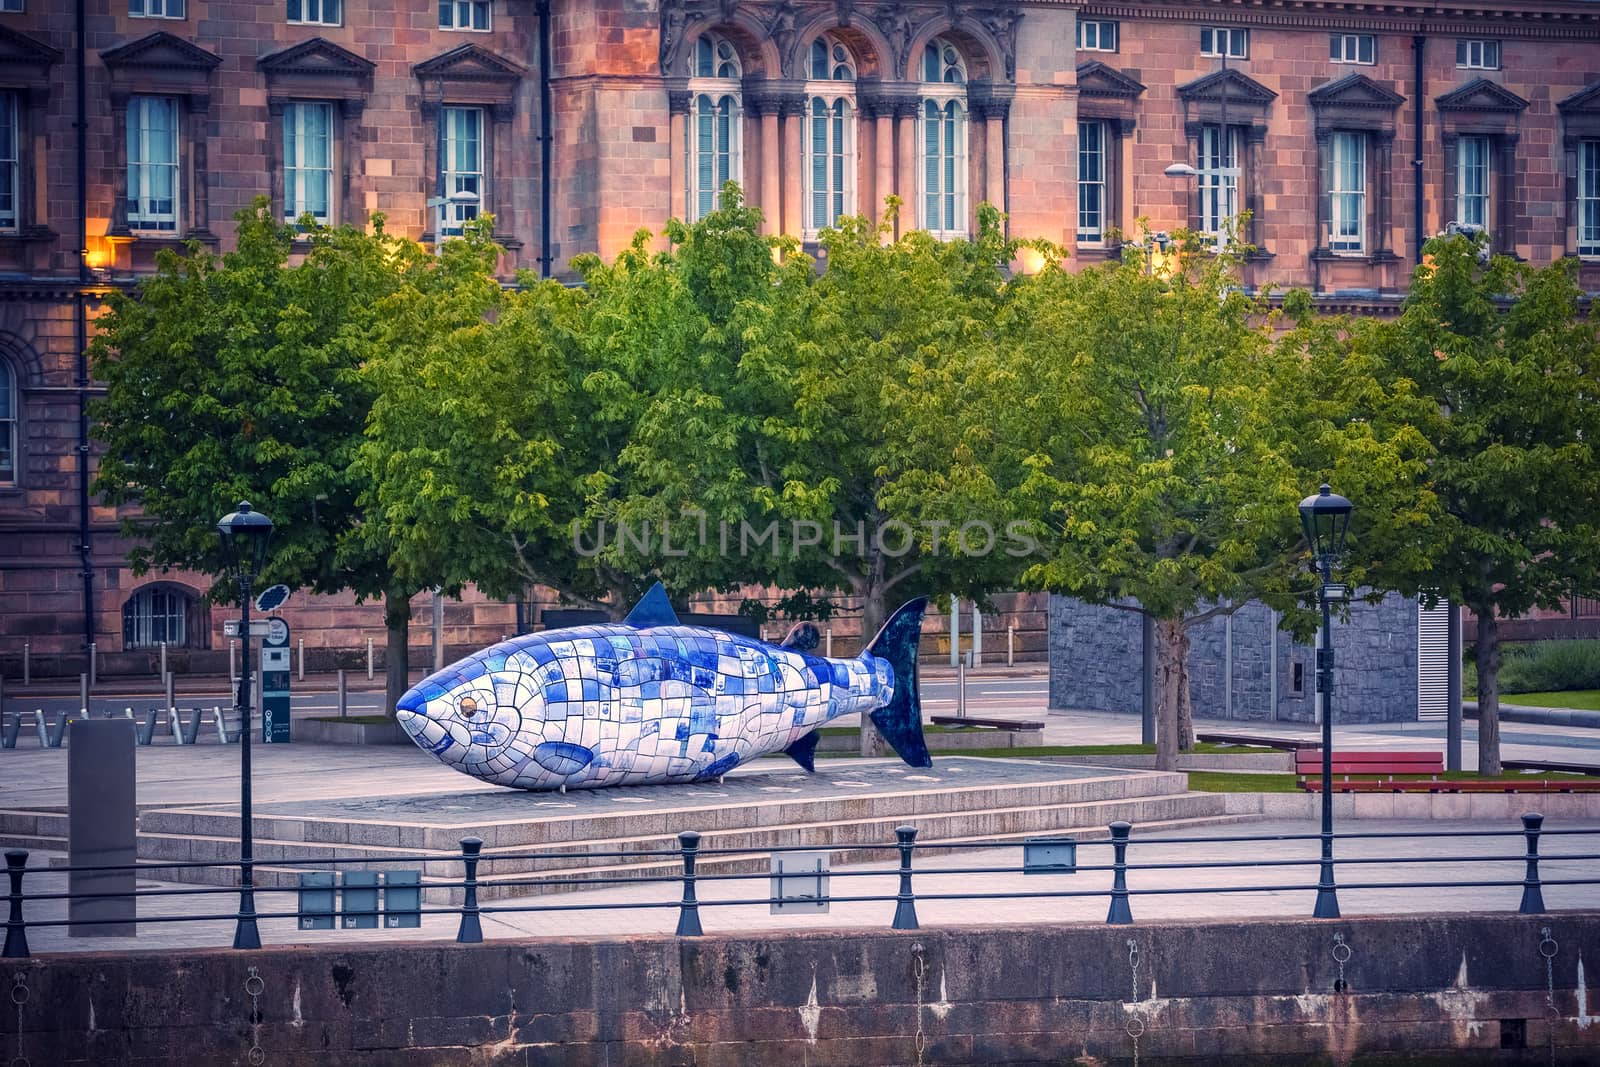 The Big Fish is a printed ceramic mosaic sculpture in Belfast also known as The Salmon of Knowledge. The work celebrates the regeneration of the Lagan River.